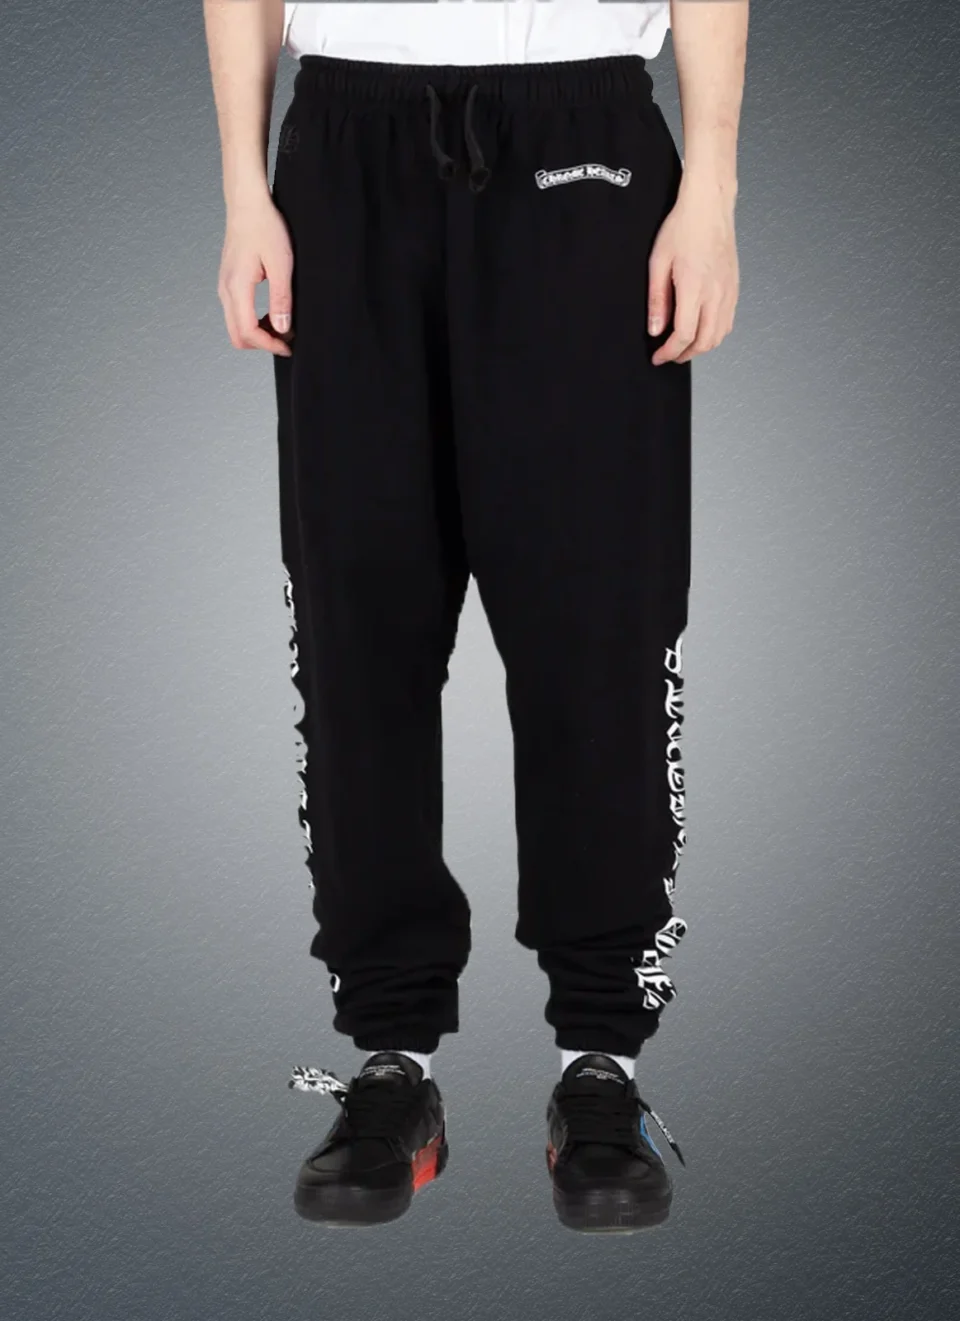 Chrome Hearts Sweatpants Category Banner